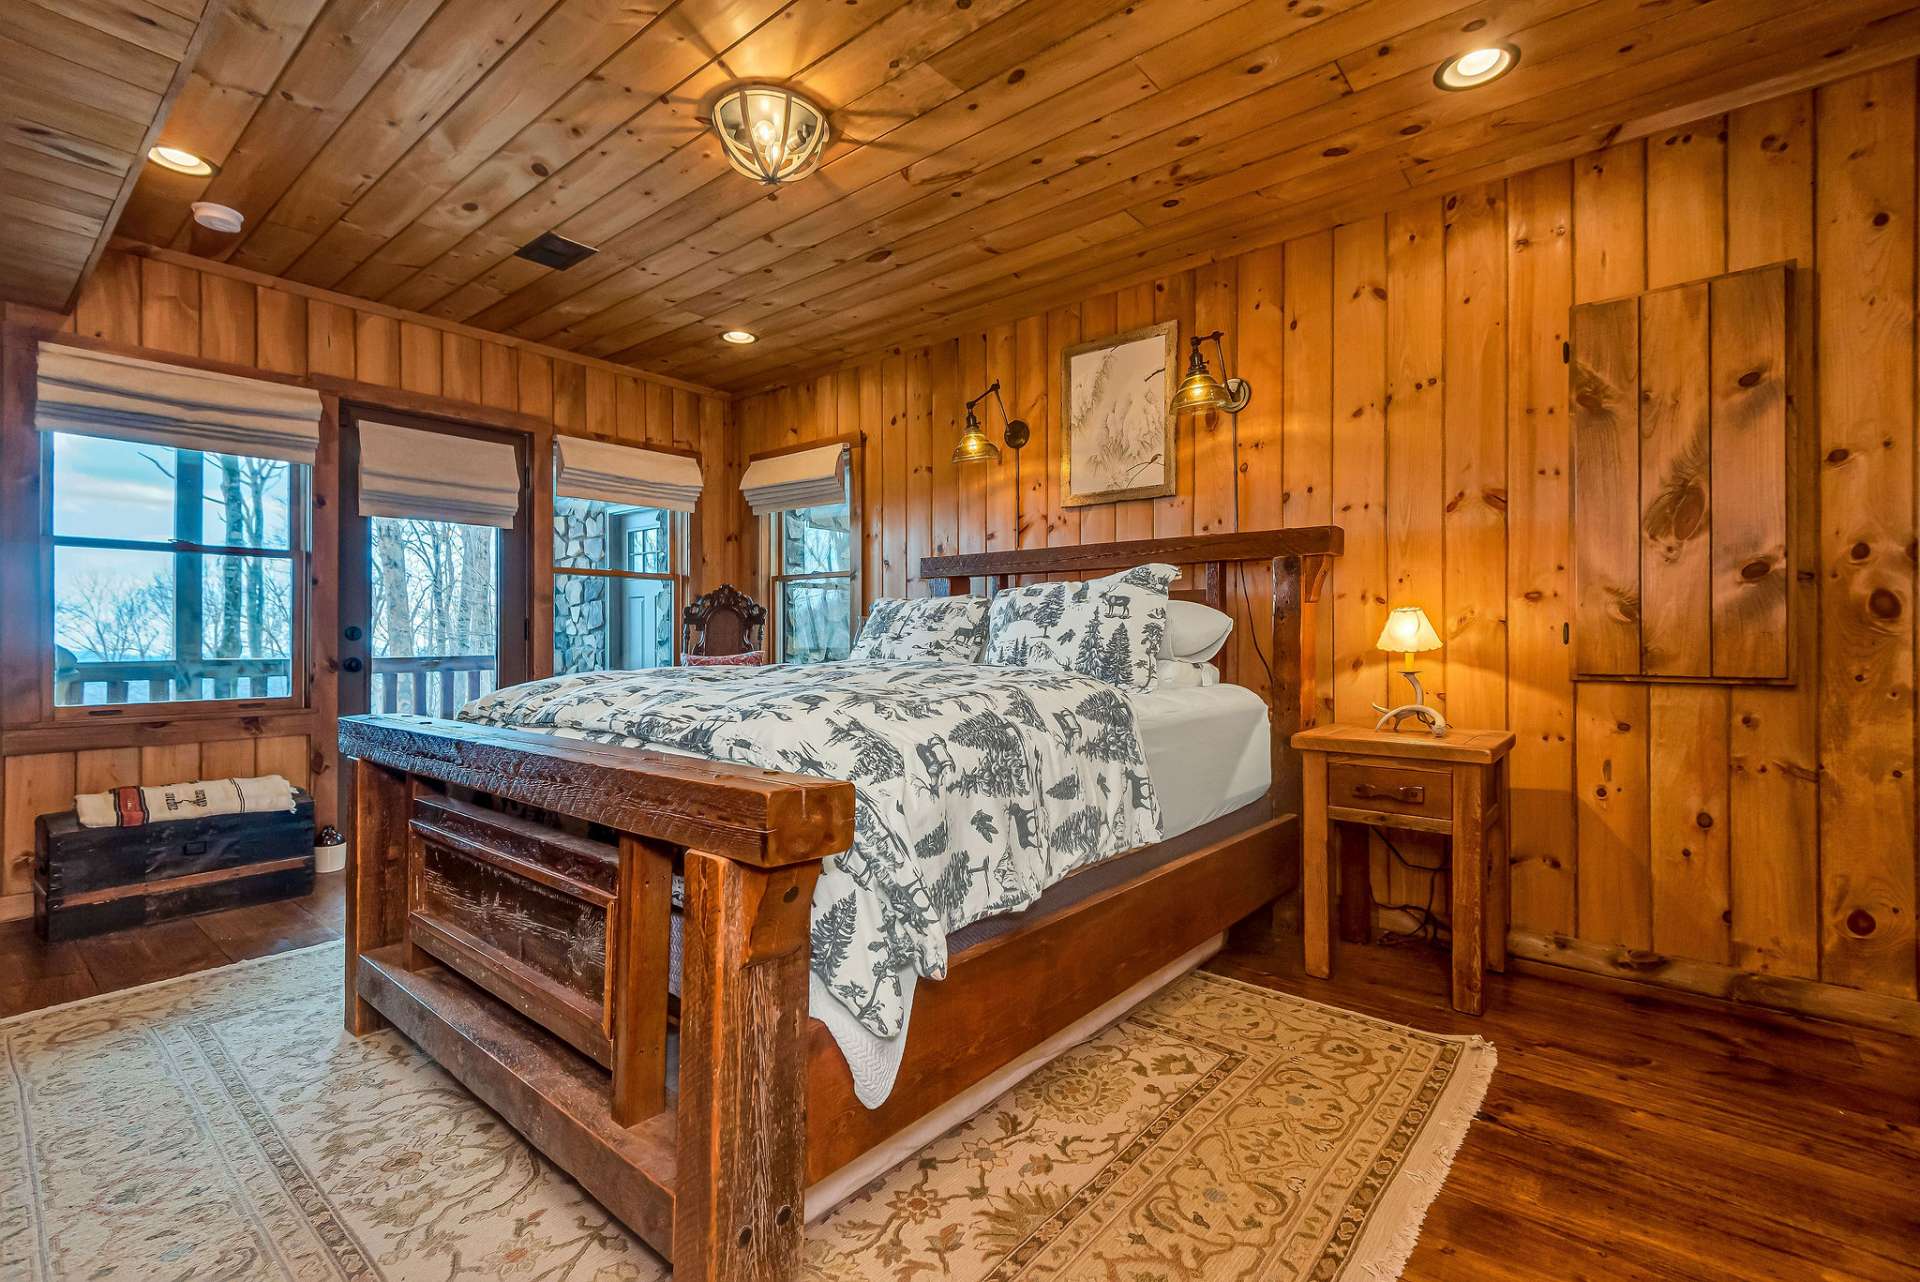 Guests can sleep in style and step out onto the deck to enjoy a cascade of mountain tops or a starry night sky.